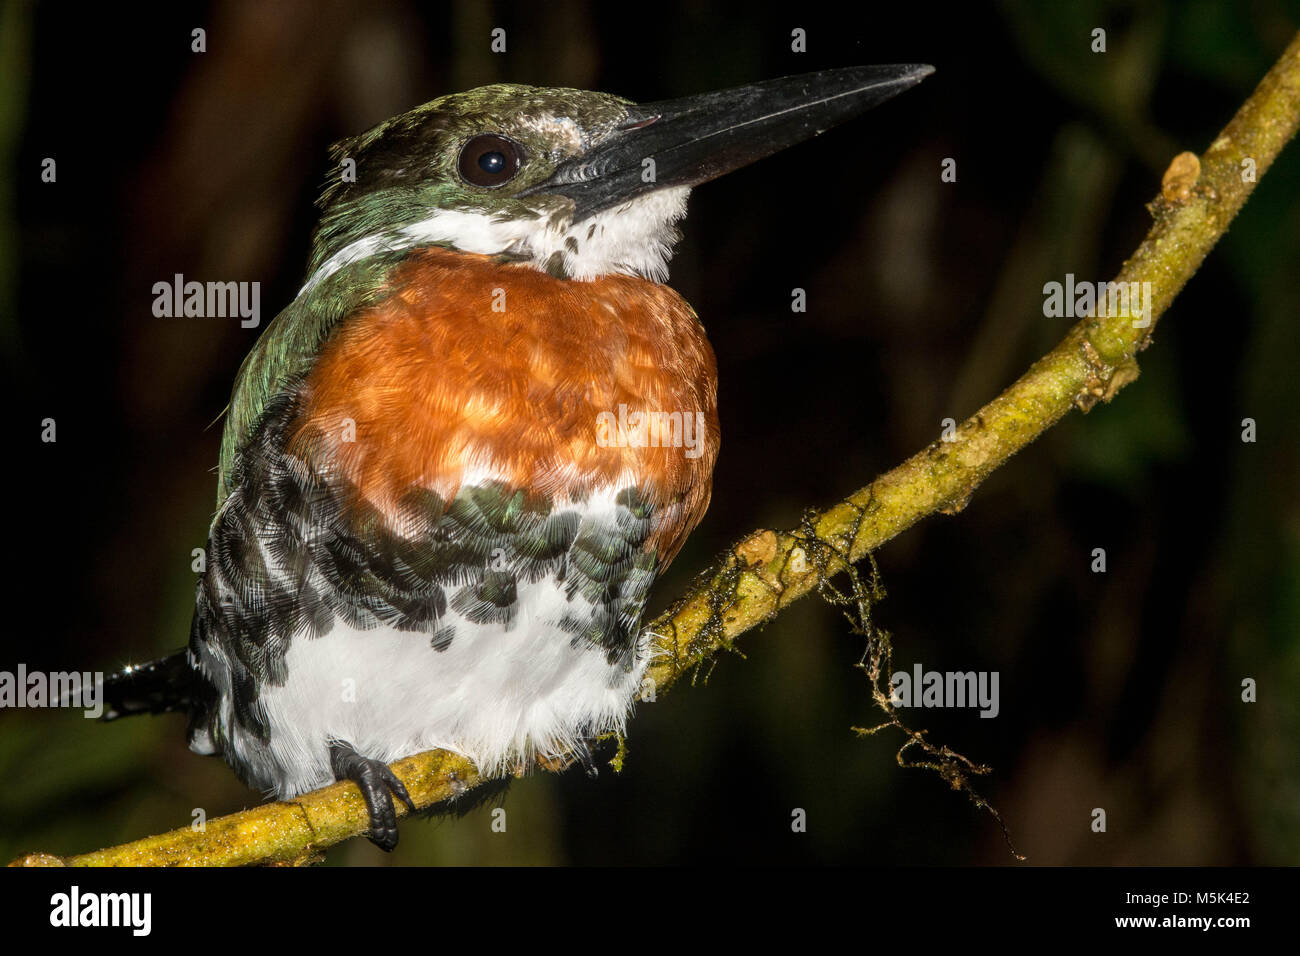 A male green kingfisher (Chloroceryle americana cabanisii) from Southern Ecuador. Stock Photo